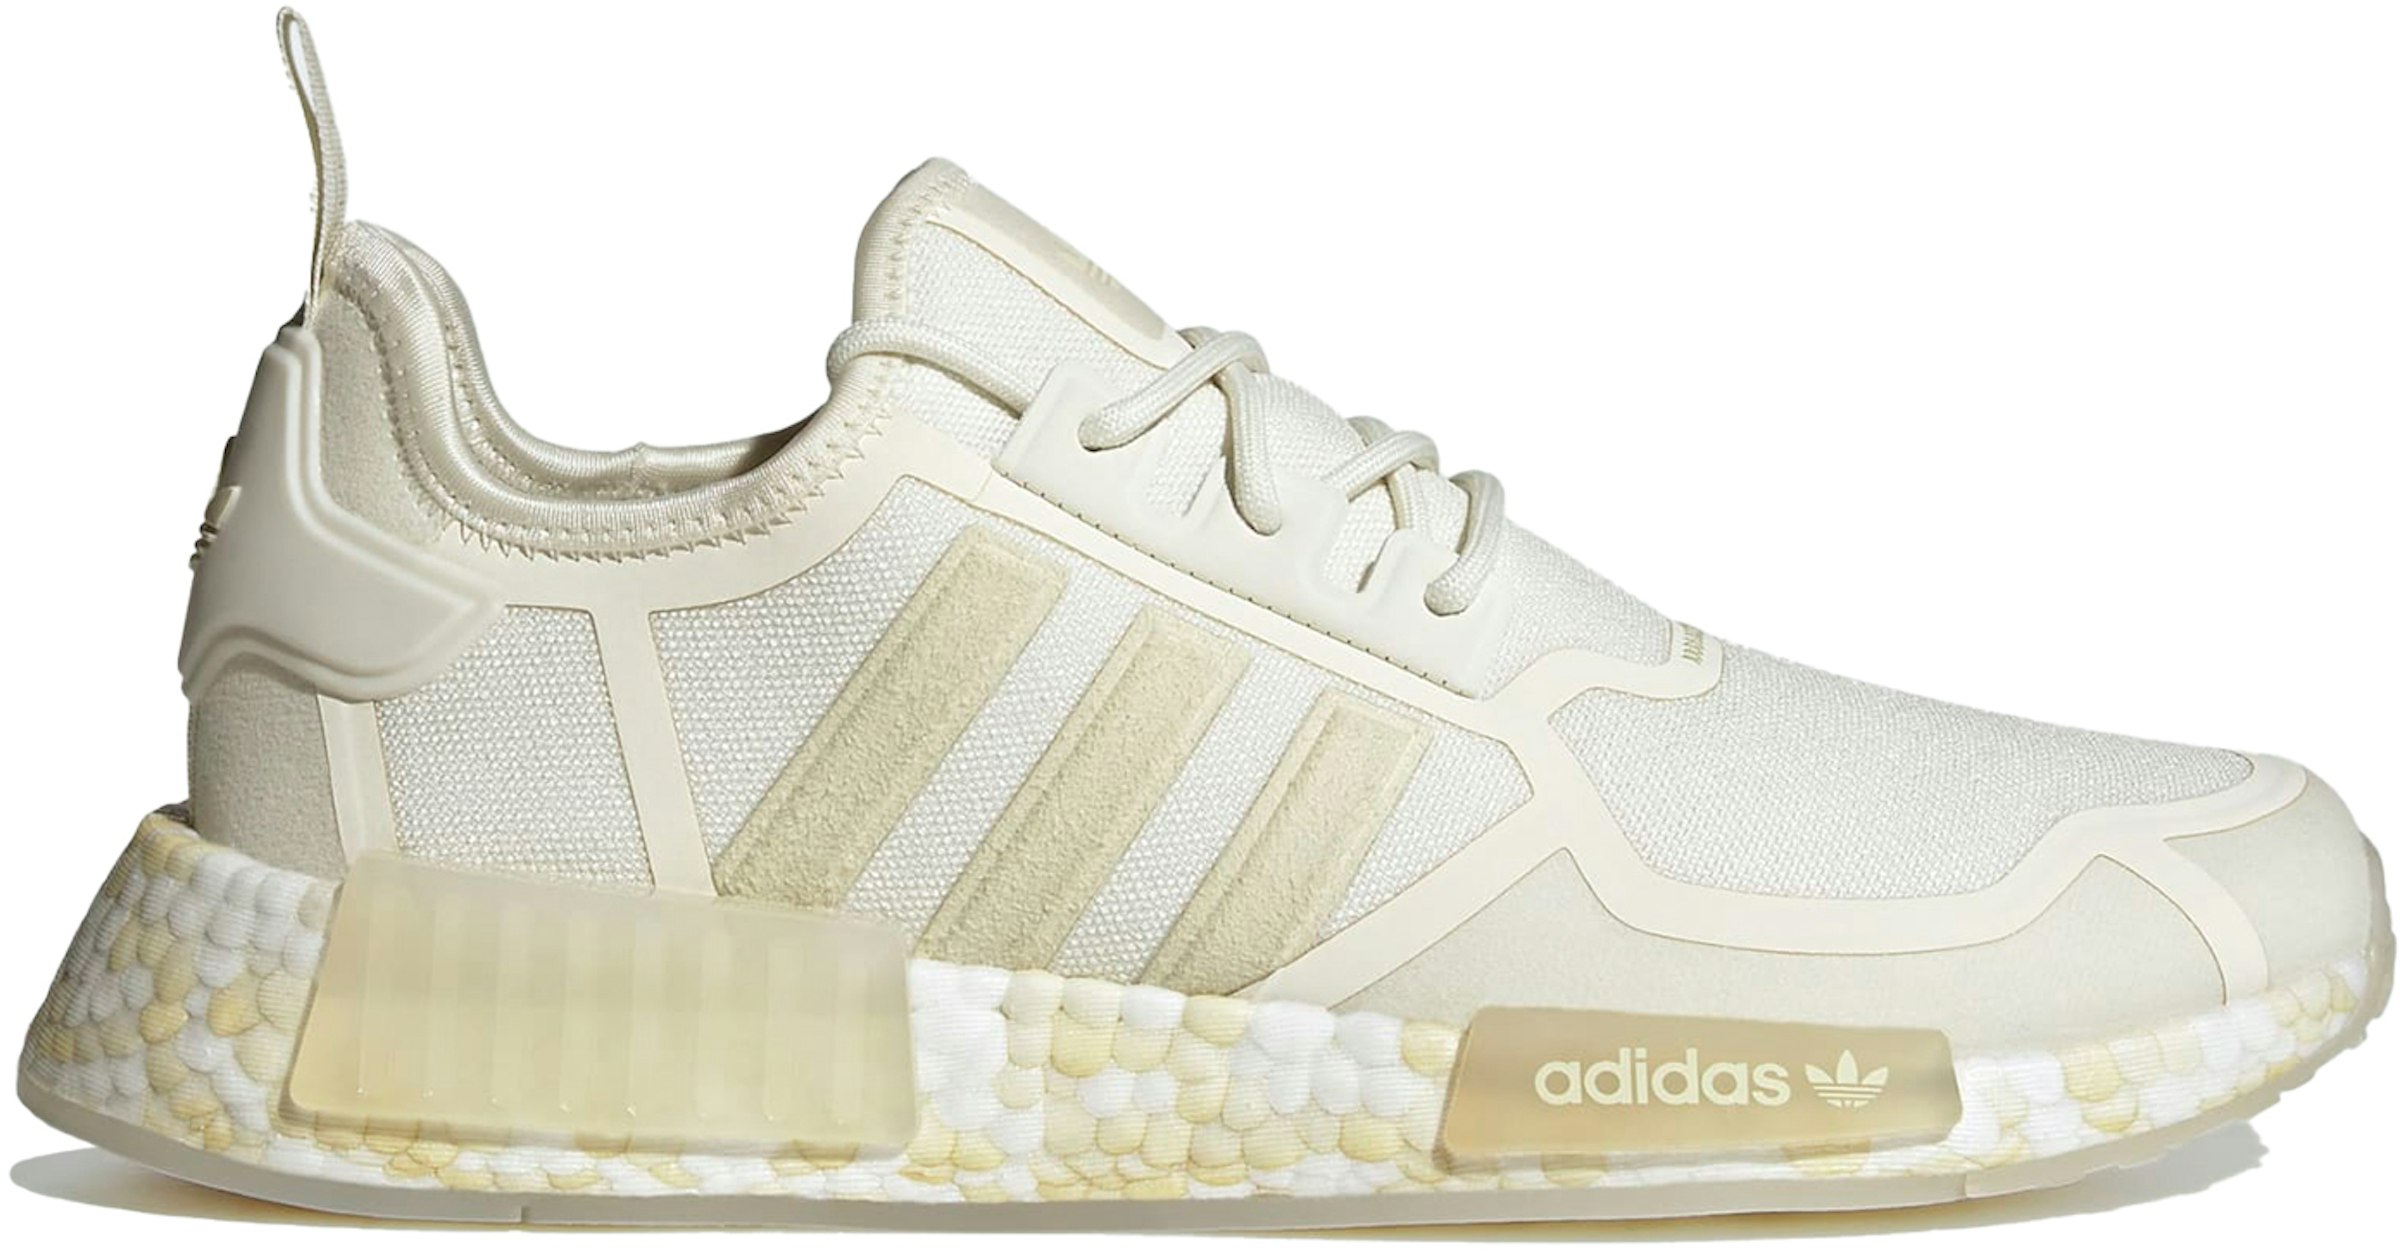 droom Formulering dubbellaag adidas NMD R1 Off White Sand Dotted Boost Men's - GW5638 - US